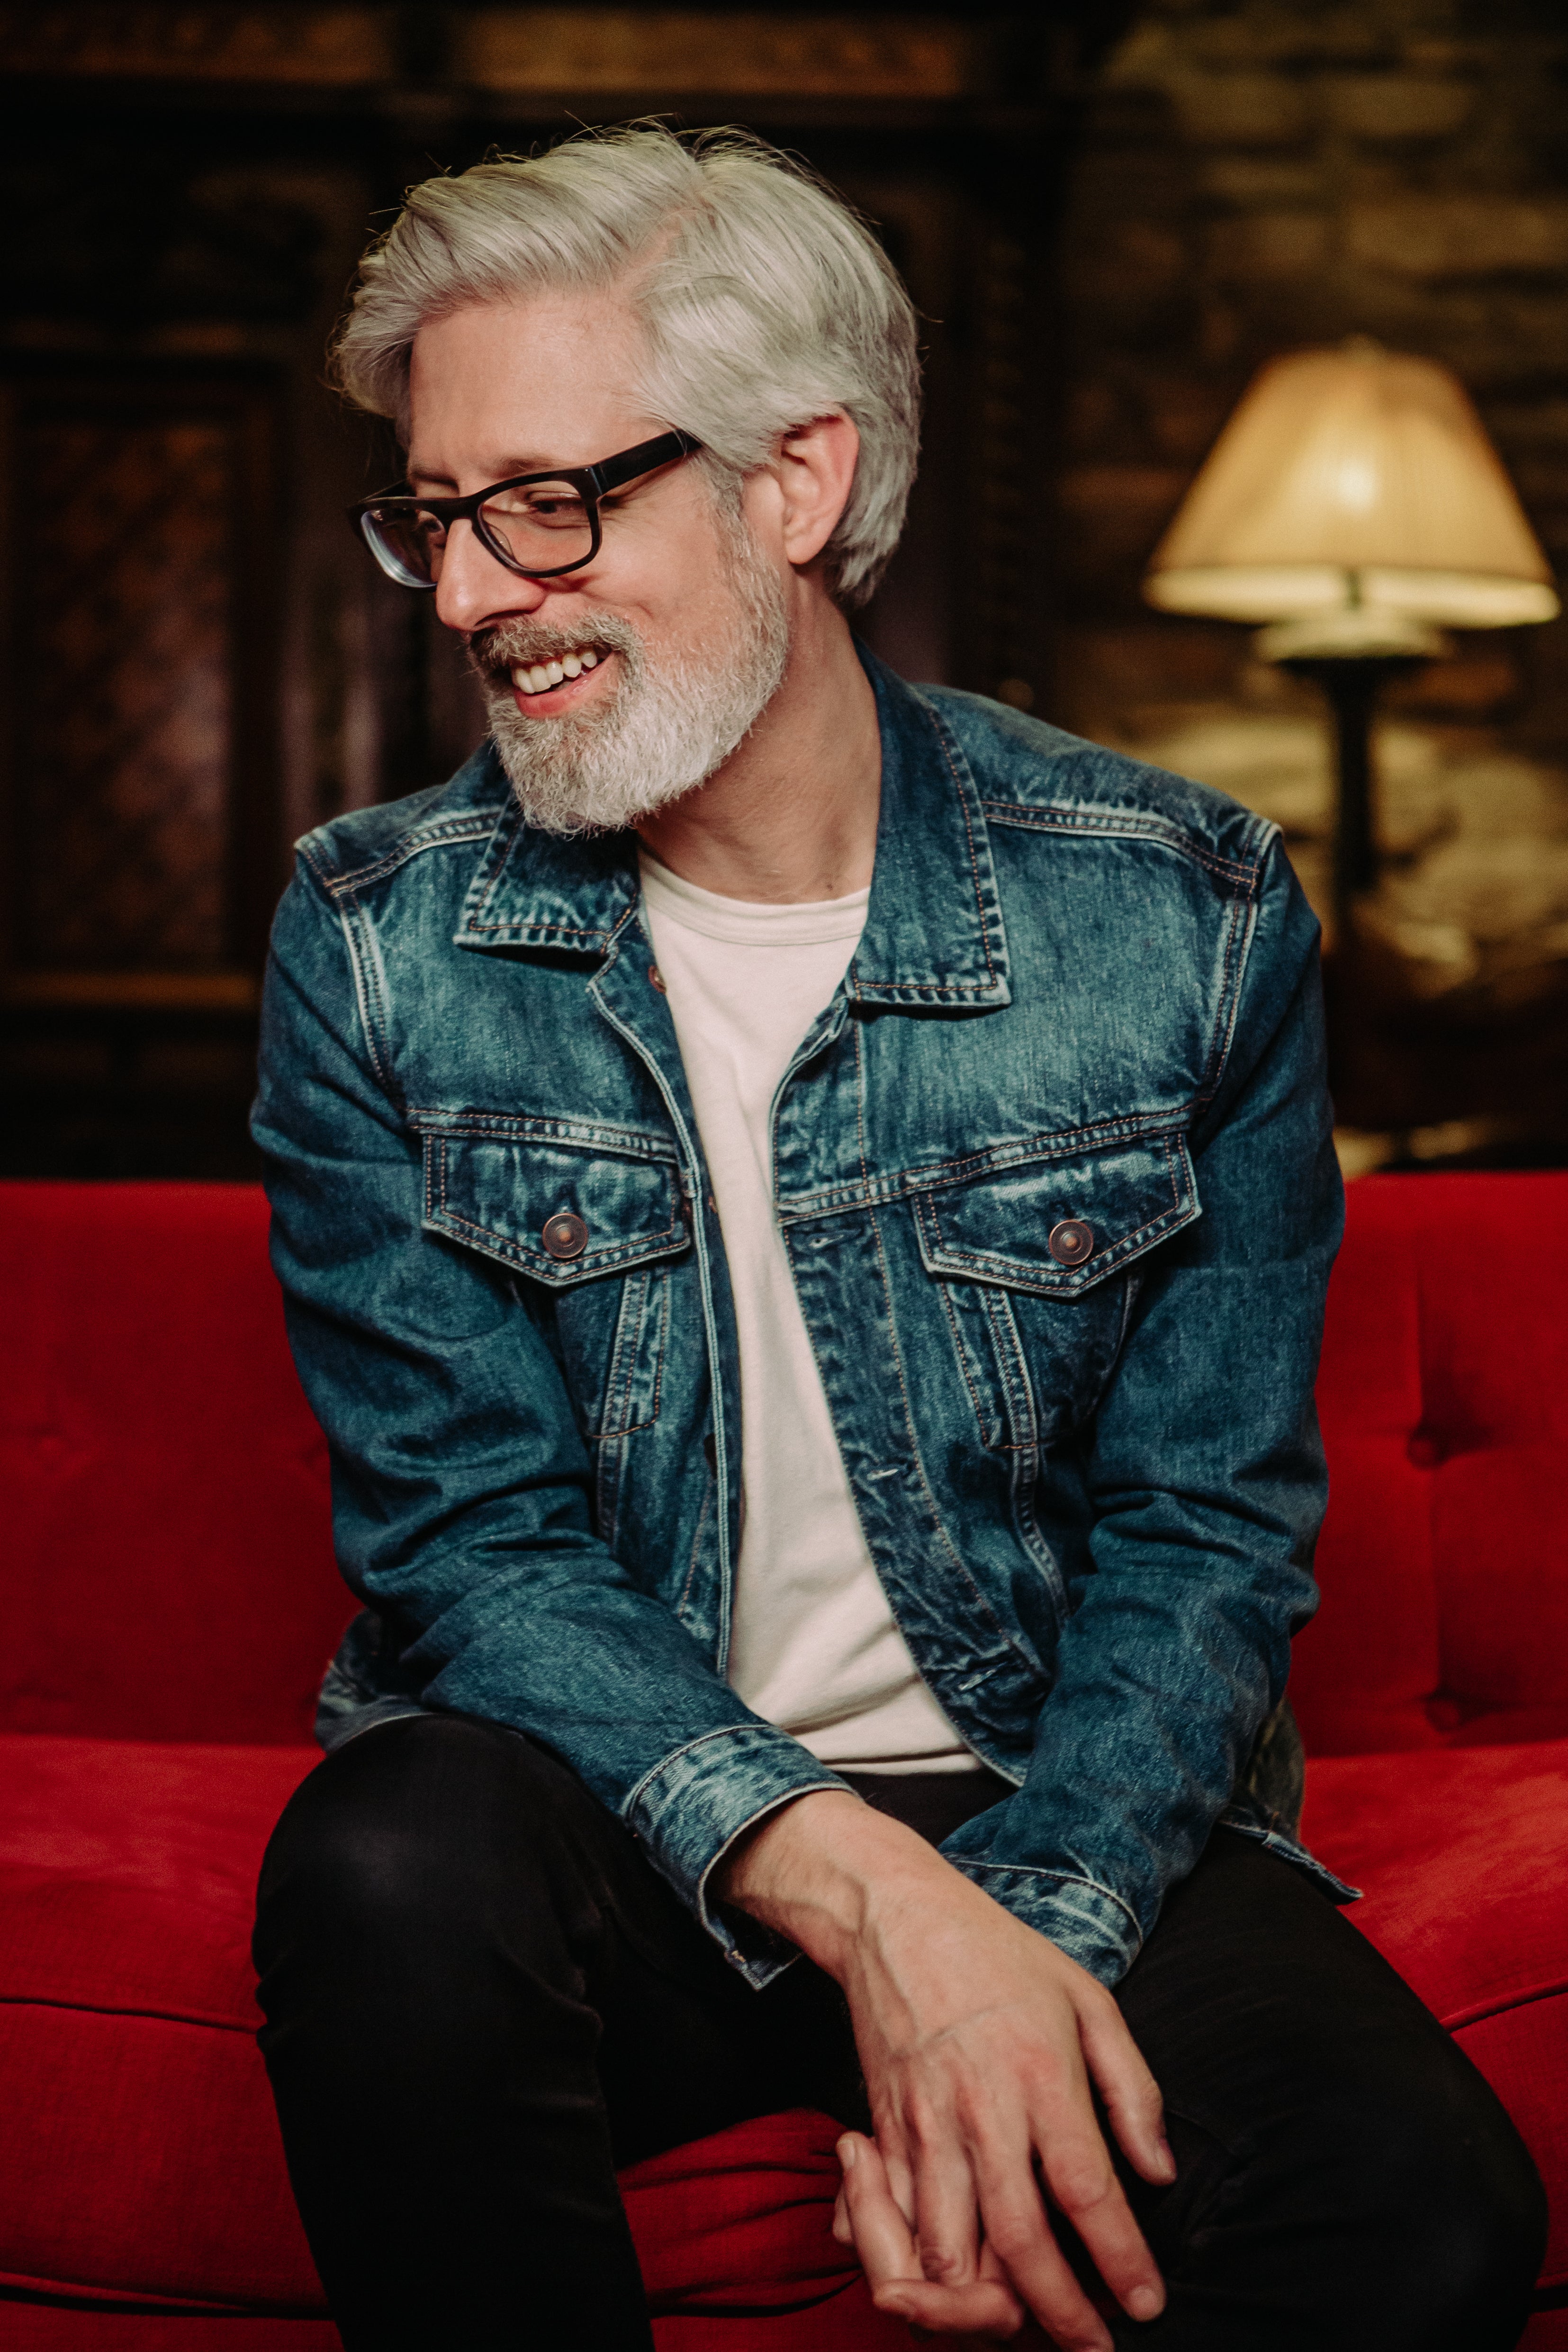 Matt Maher - The Live and In the Room Tour free presale code for early tickets in Naperville